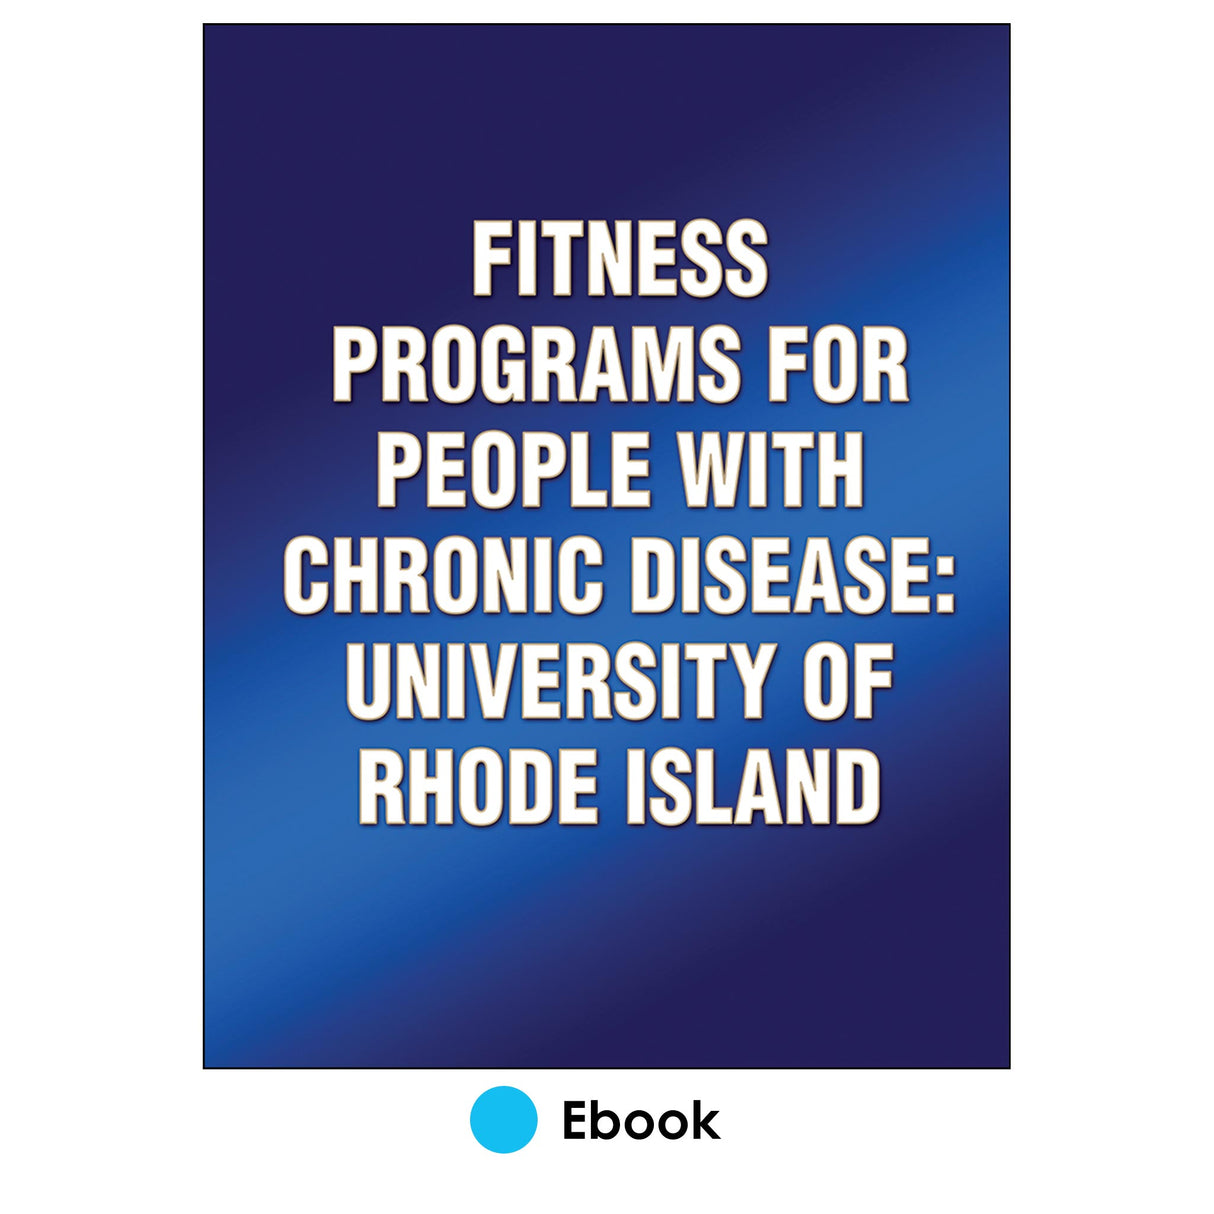 Fitness Programs for People with Chronic Disease: University of Rhode Island